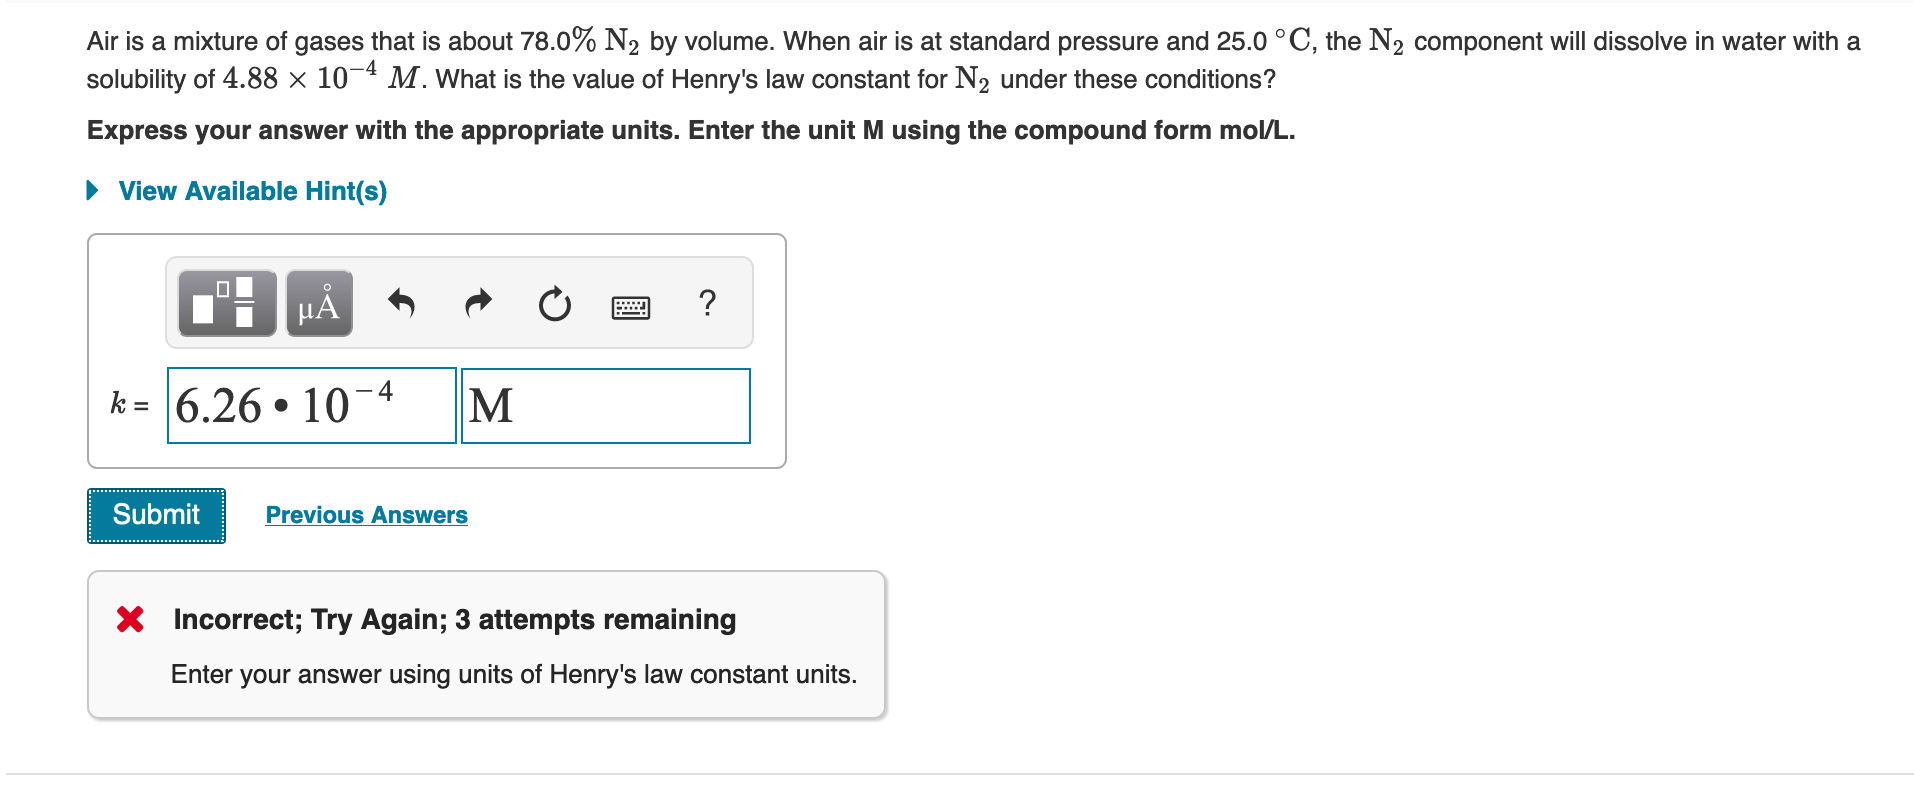 Air is a mixture of gases that is about 78.0% N2 by volume. When air is at standard pressure and 25.0 °C, the N2 component will dissolve in water with a
solubility of 4.88 × 10¬4 M. What is the value of Henry's law constant for N2 under these conditions?
Express your answer with the appropriate units. Enter the unit M using the compound form mol/L.
• View Available Hint(s)
k = 6.26 • 10-4
M
Submit
Previous Answers
X Incorrect; Try Again; 3 attempts remaining
Enter your answer using units of Henry's law constant units.
